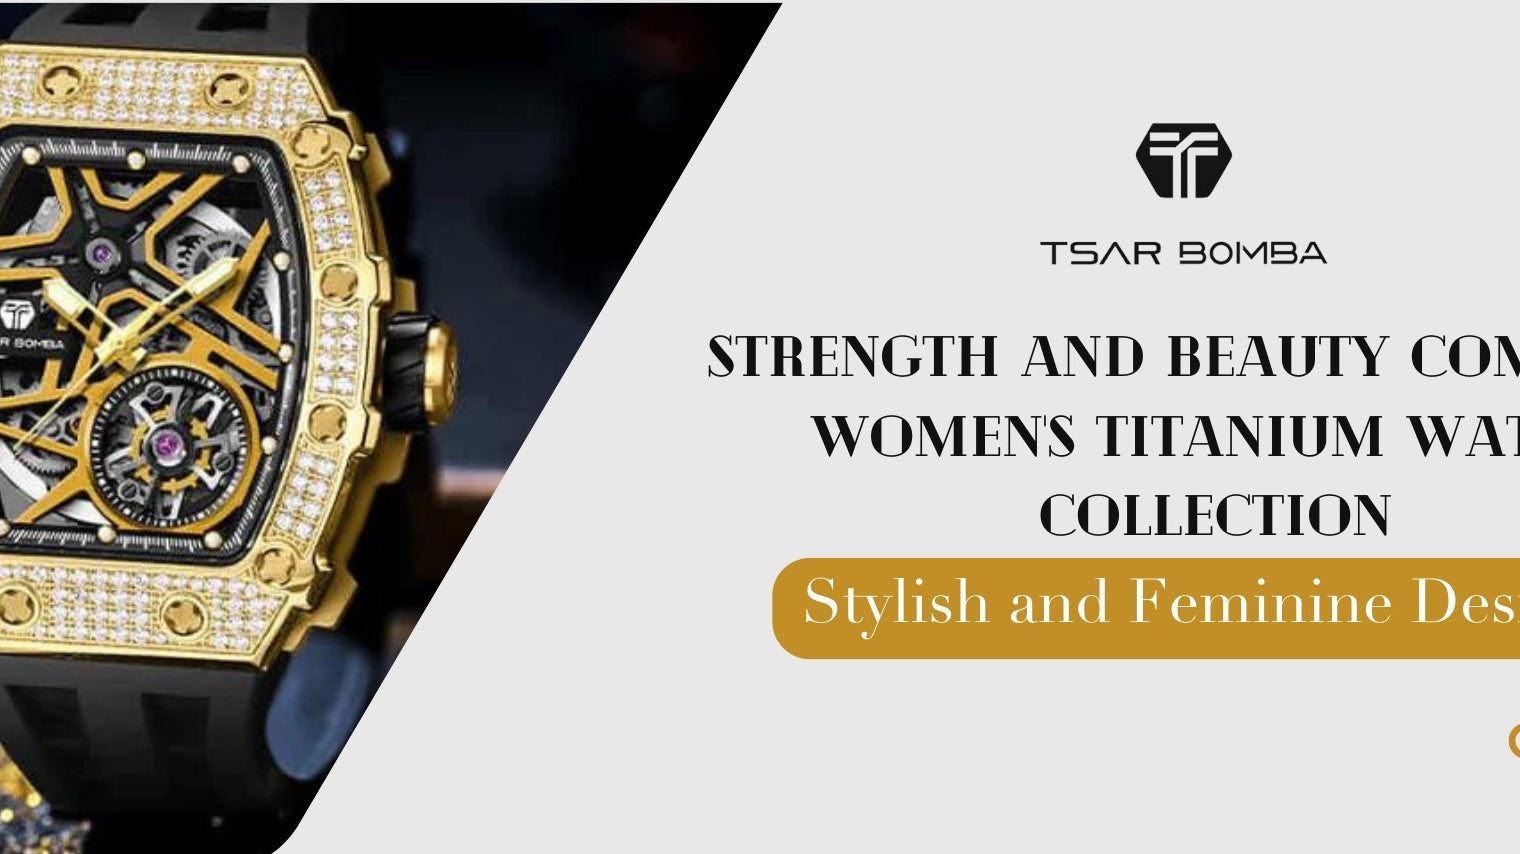 Strength and Beauty Combined: Women's Titanium Watch Collection